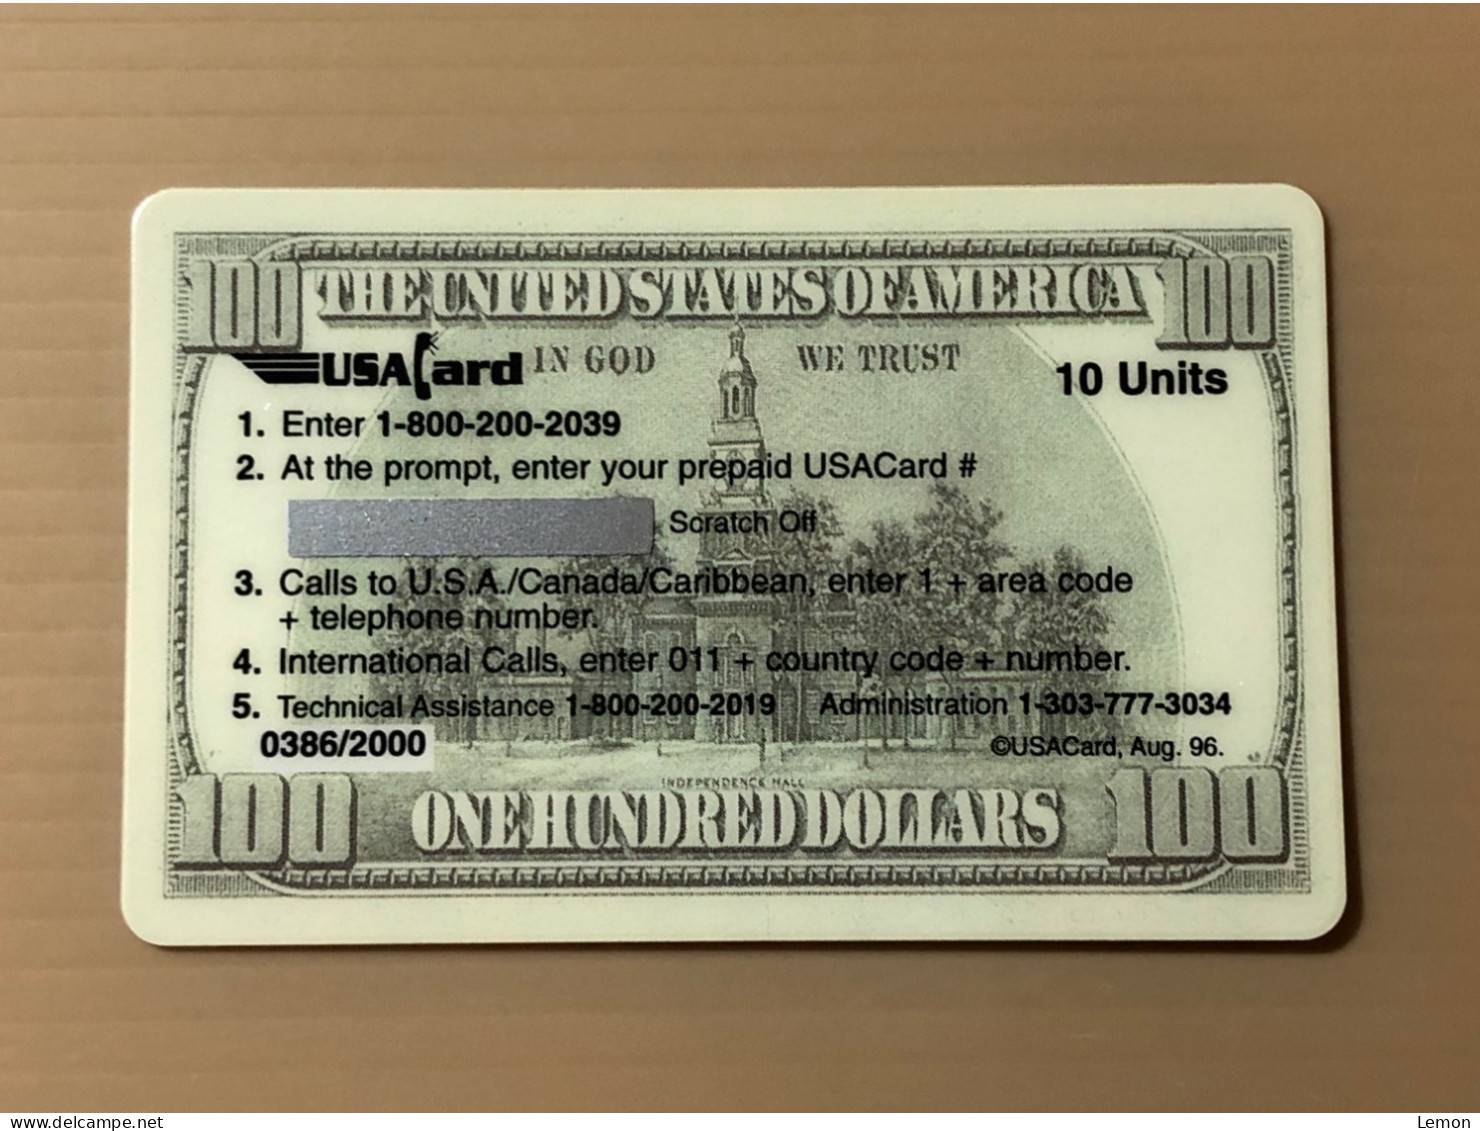 Mint USA UNITED STATES America Prepaid Telecard Phonecard, Banknote One Hundred Dollar Currency, Set Of 1 Mint Card - Sammlungen